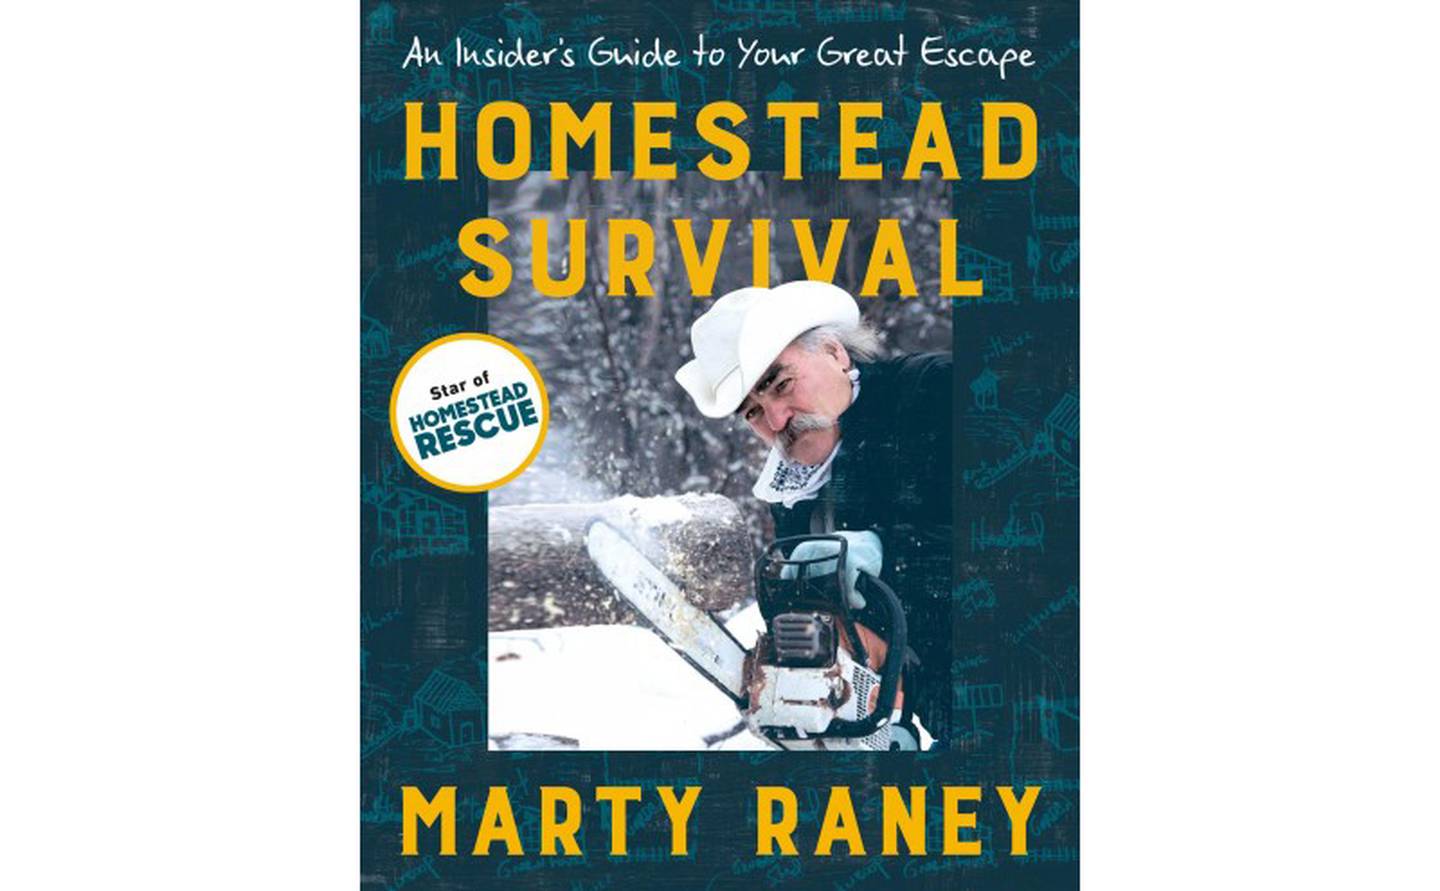 HORIZONTAL WHITE SPACE “Homestead Survival: An Insider’s Guide to Your Great Escape”